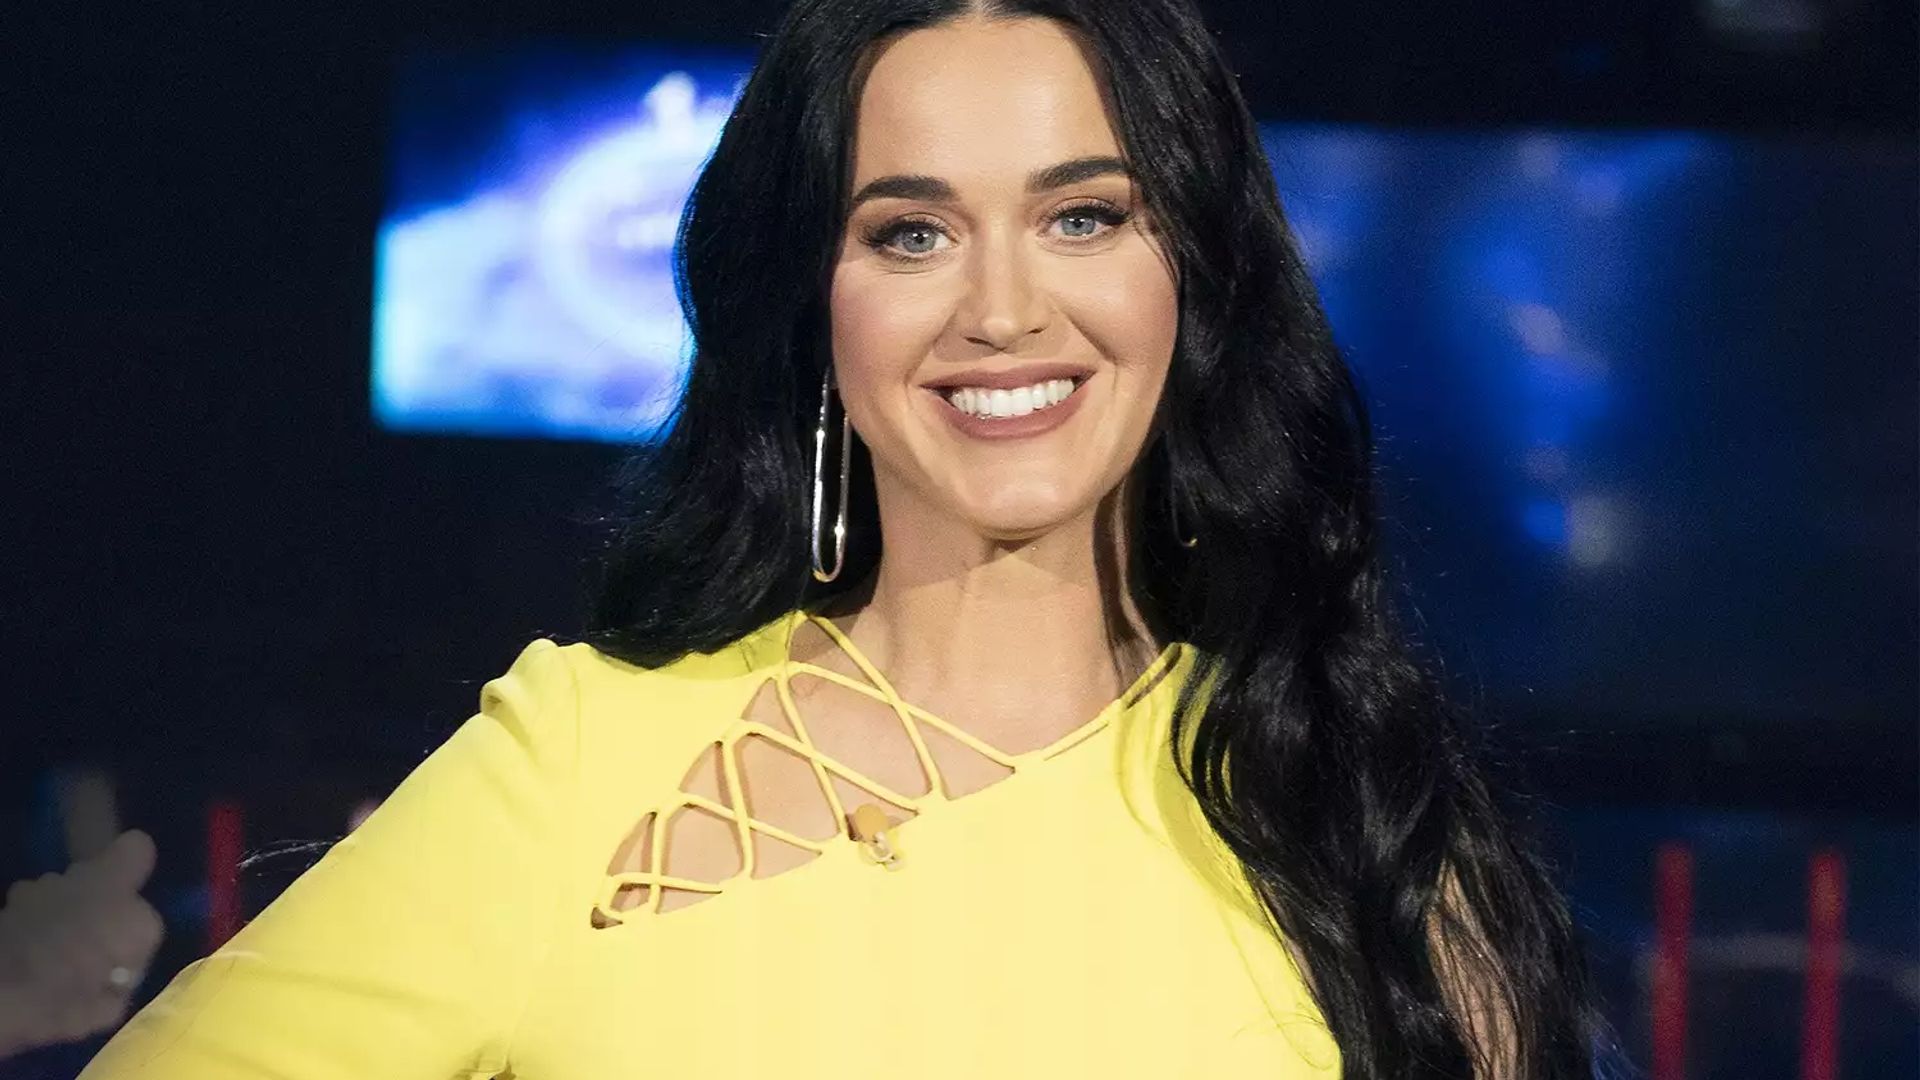 Katy Perry gets booed for the first time on American Idol after being called out for 'mom-shaming'